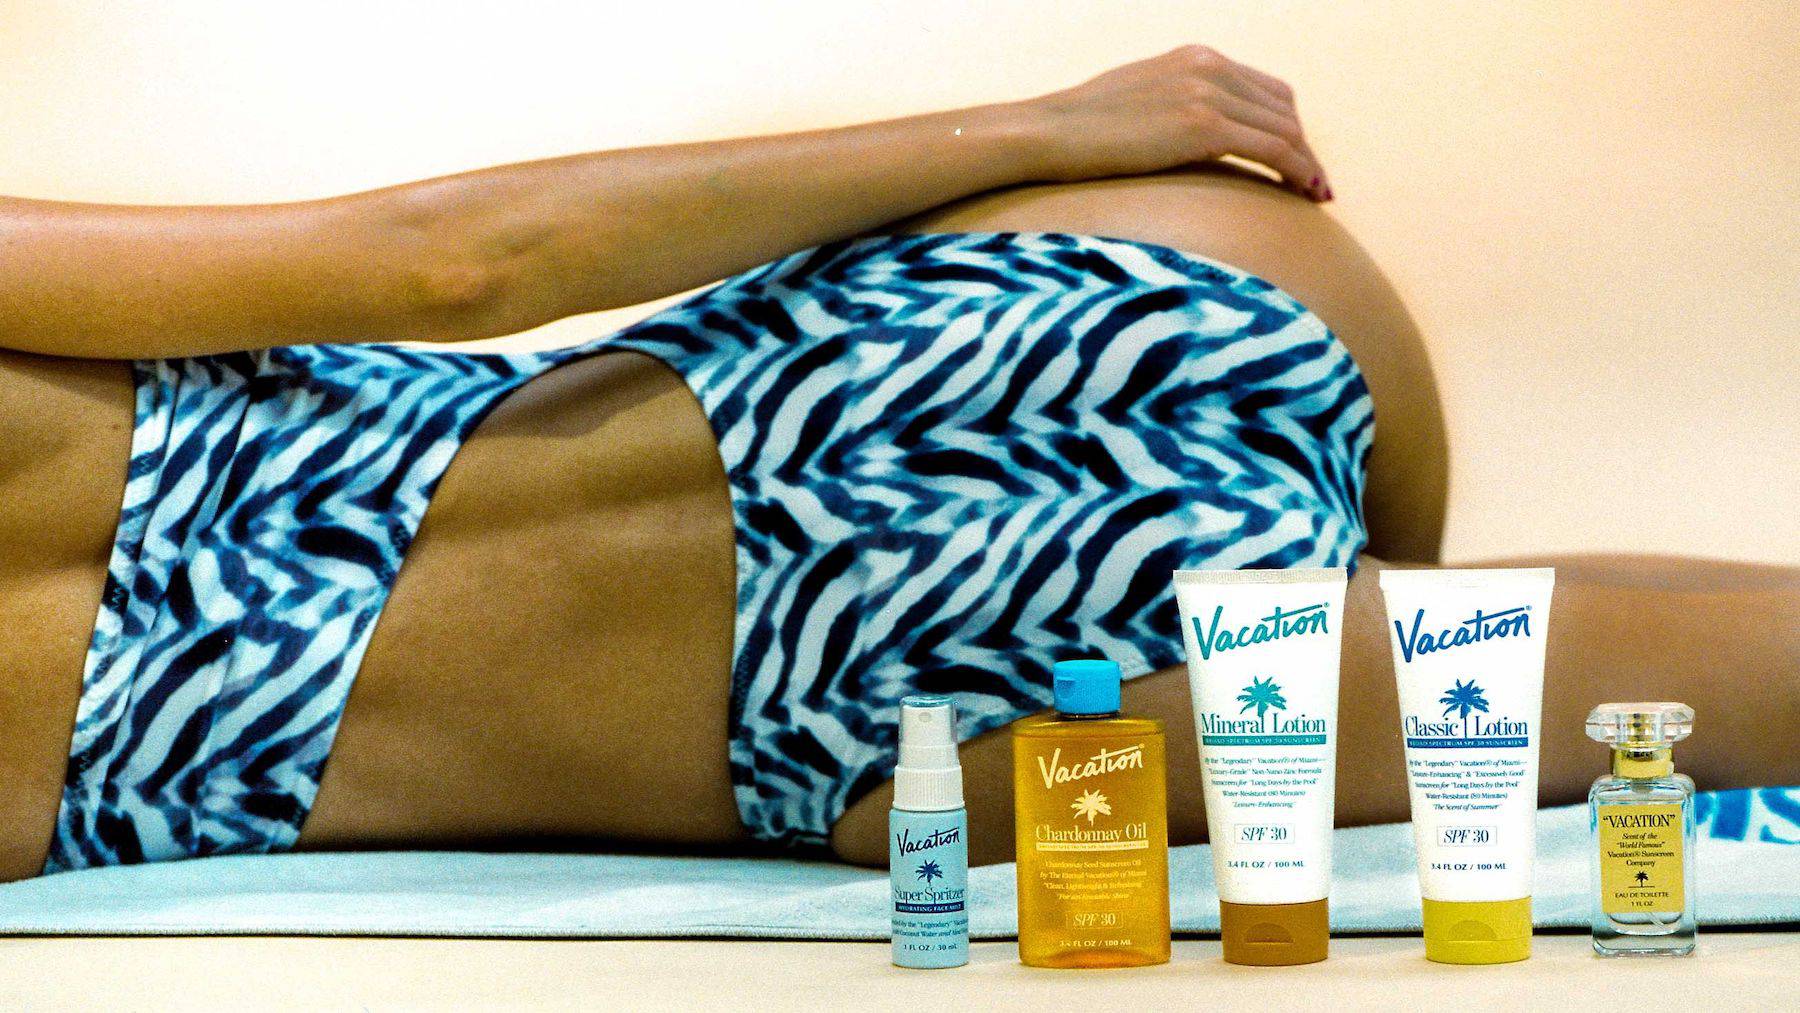 vacation brand sunscreen advertisement model laying down products